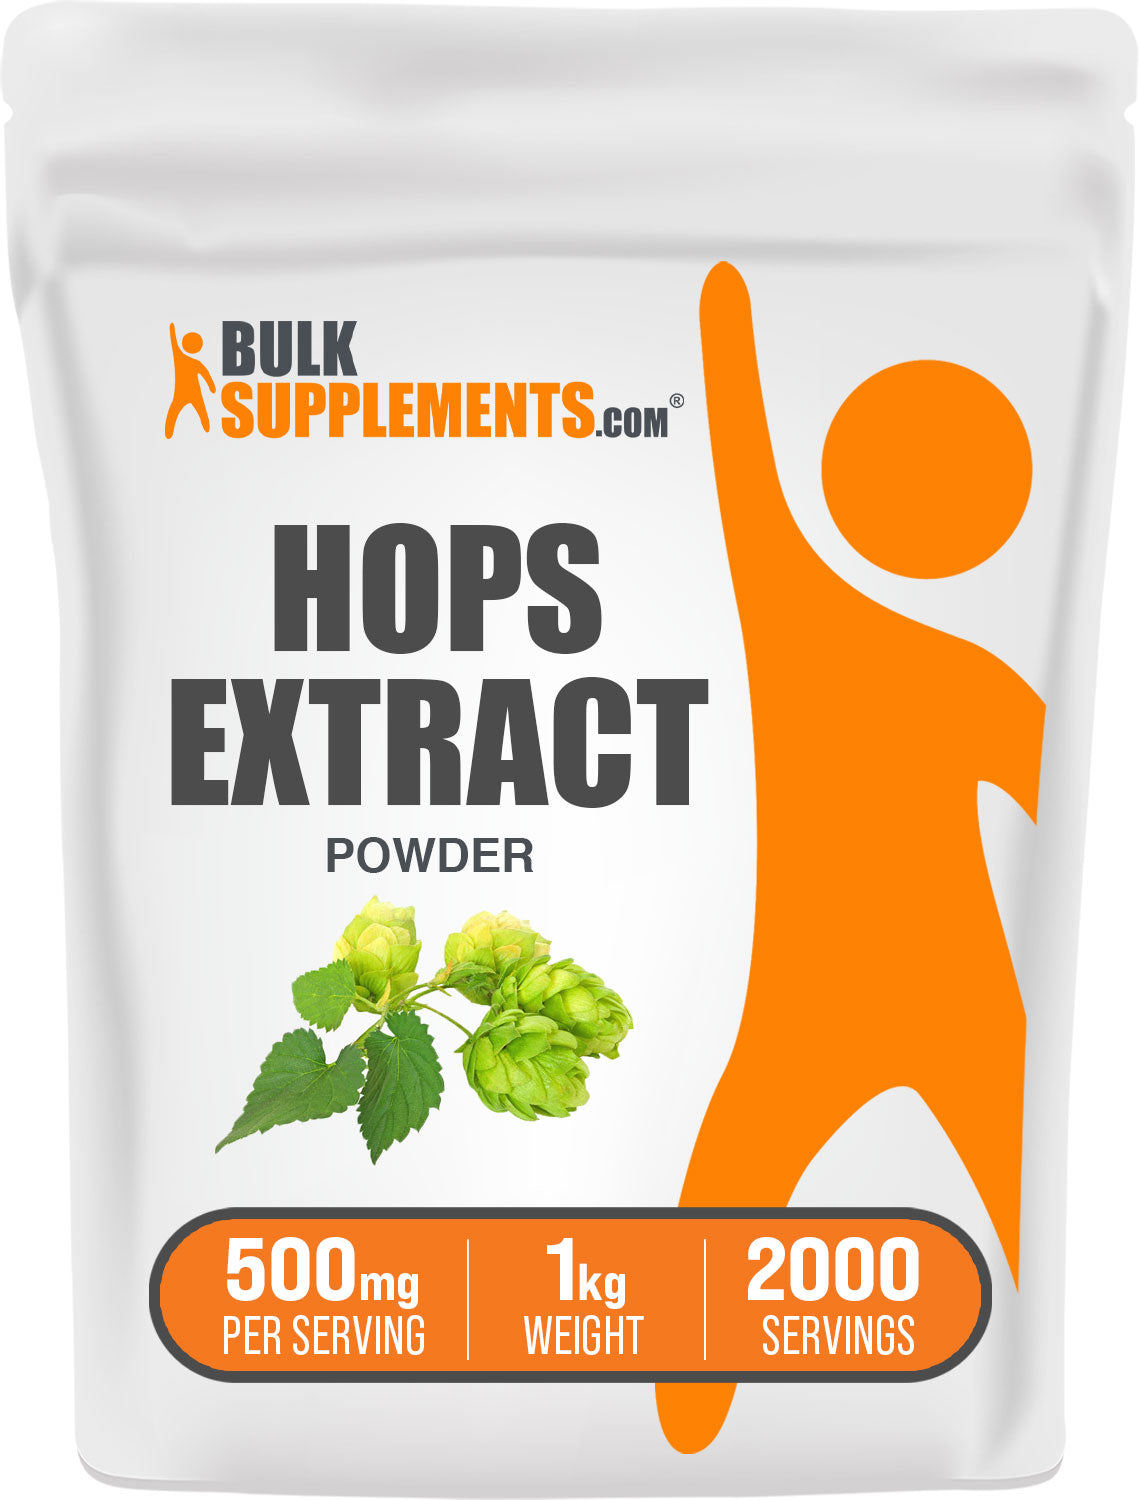 Hops Extract 1kg